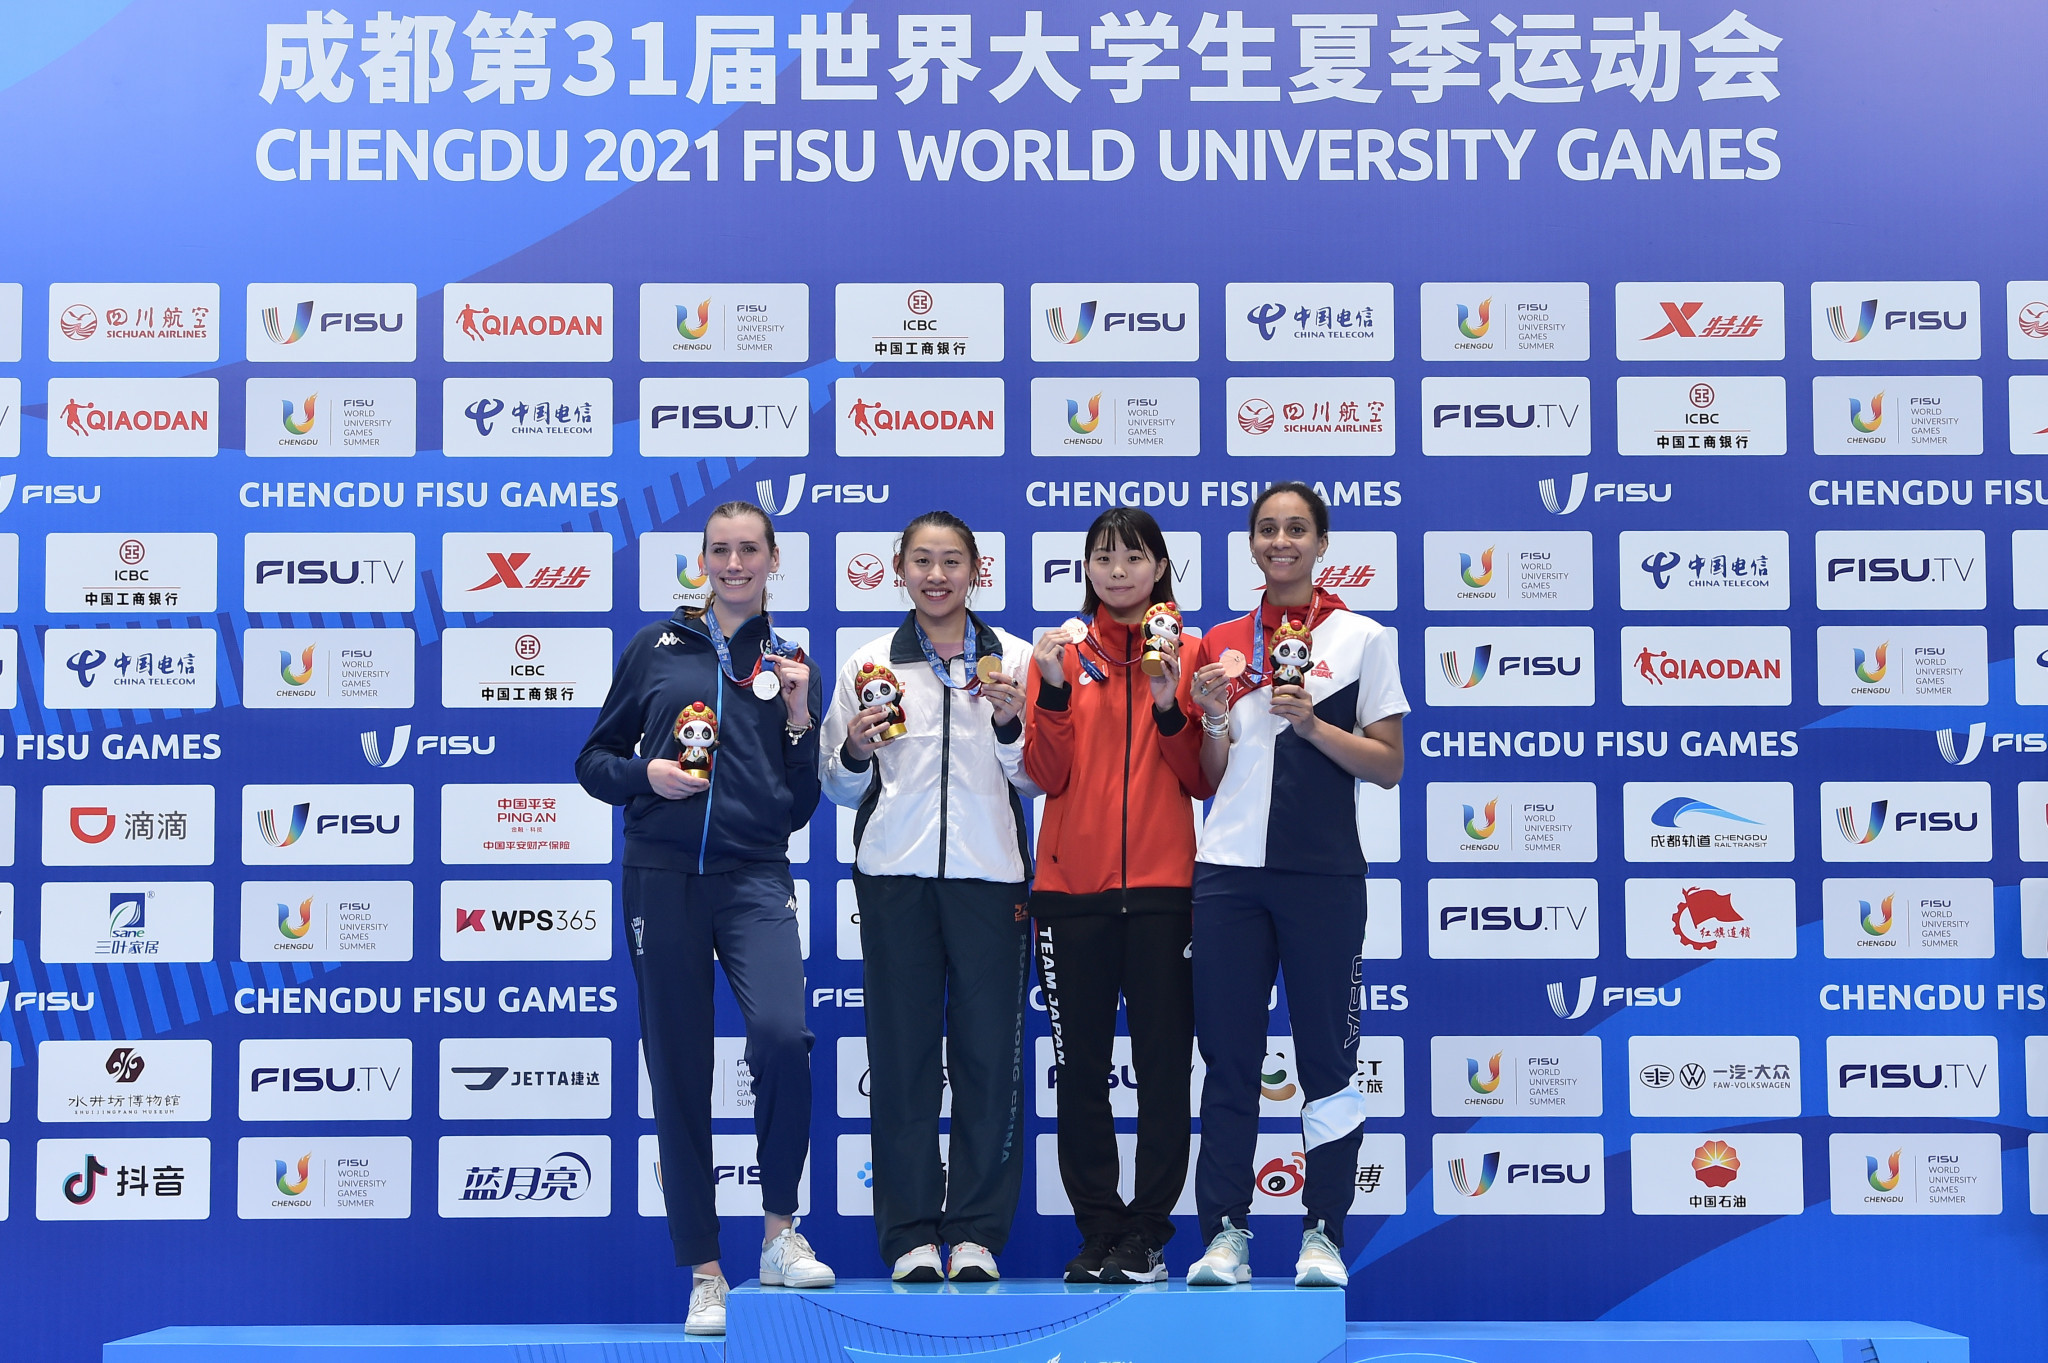 The podium for the women's epee fencing discipline ©FISU